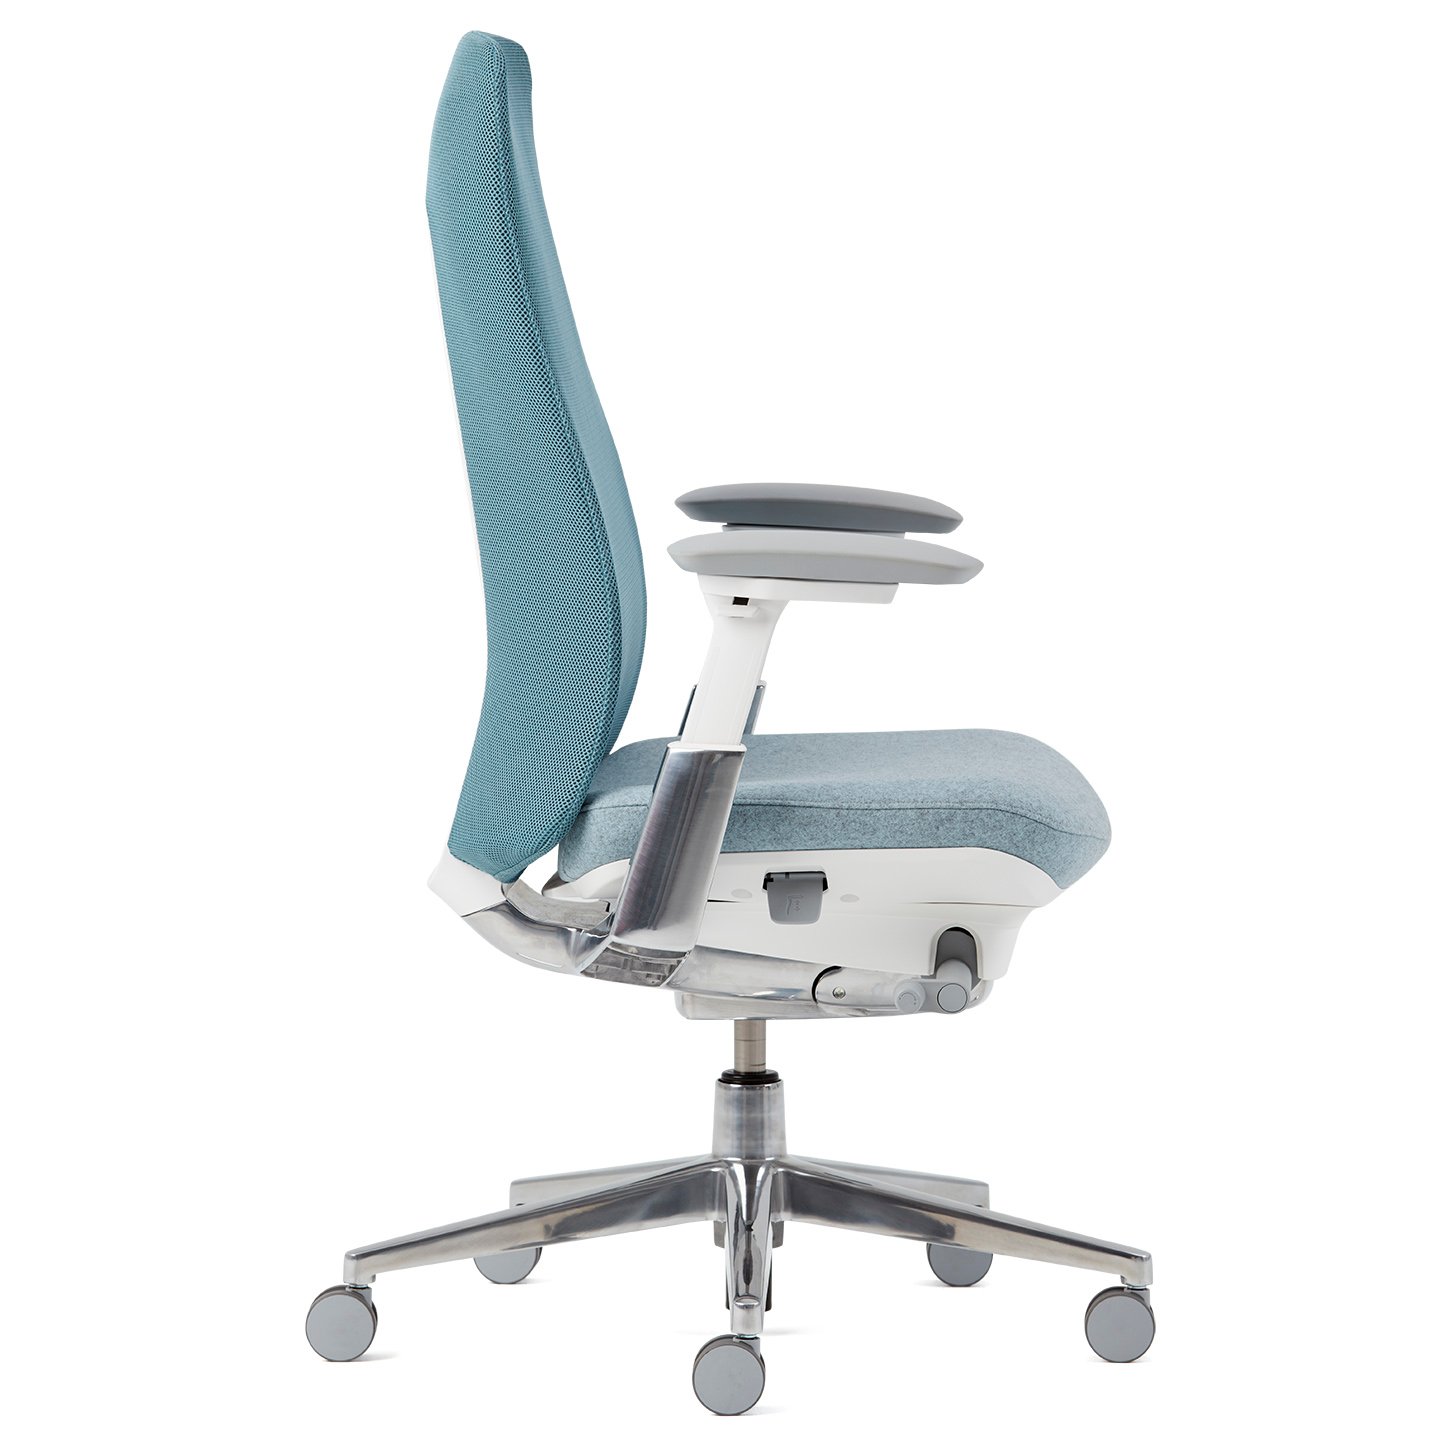 Haworth Fern Task chair in blue upholstery as seen from the side view